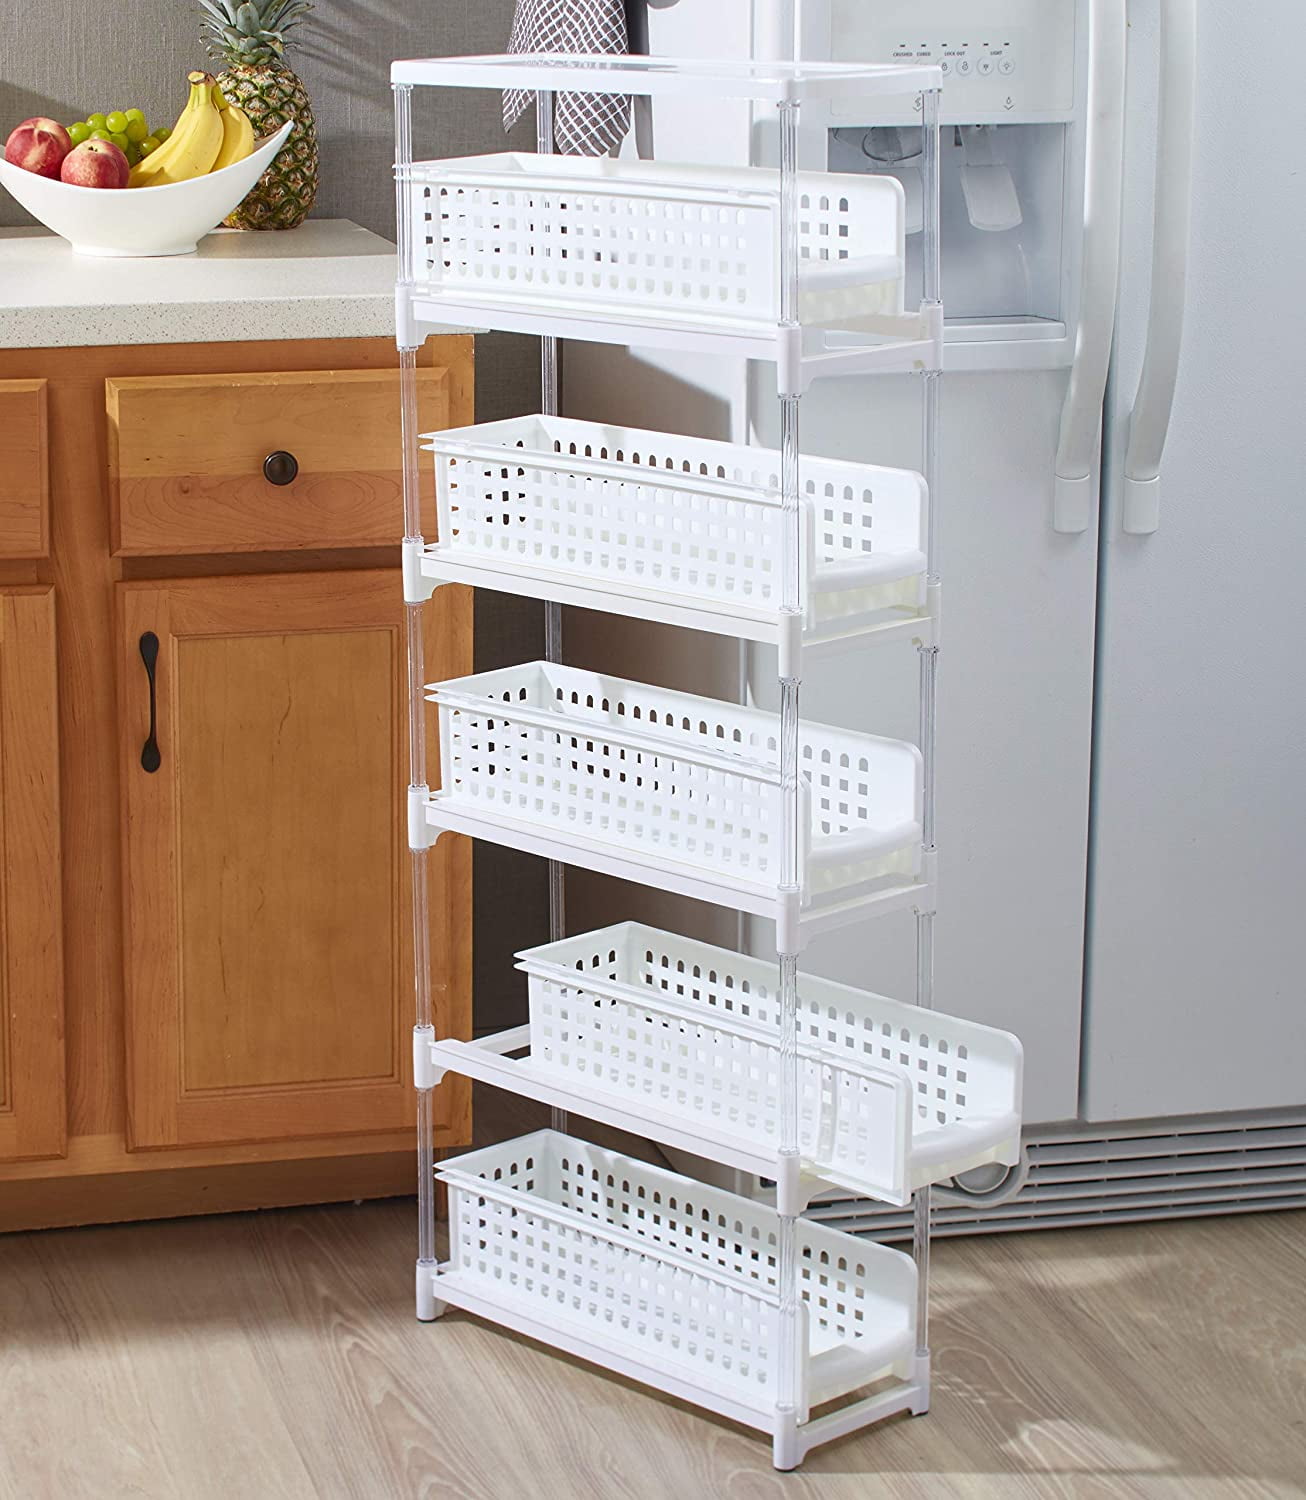 Slim Kitchen Storage with Five Slide-Out Drawers for Pantries